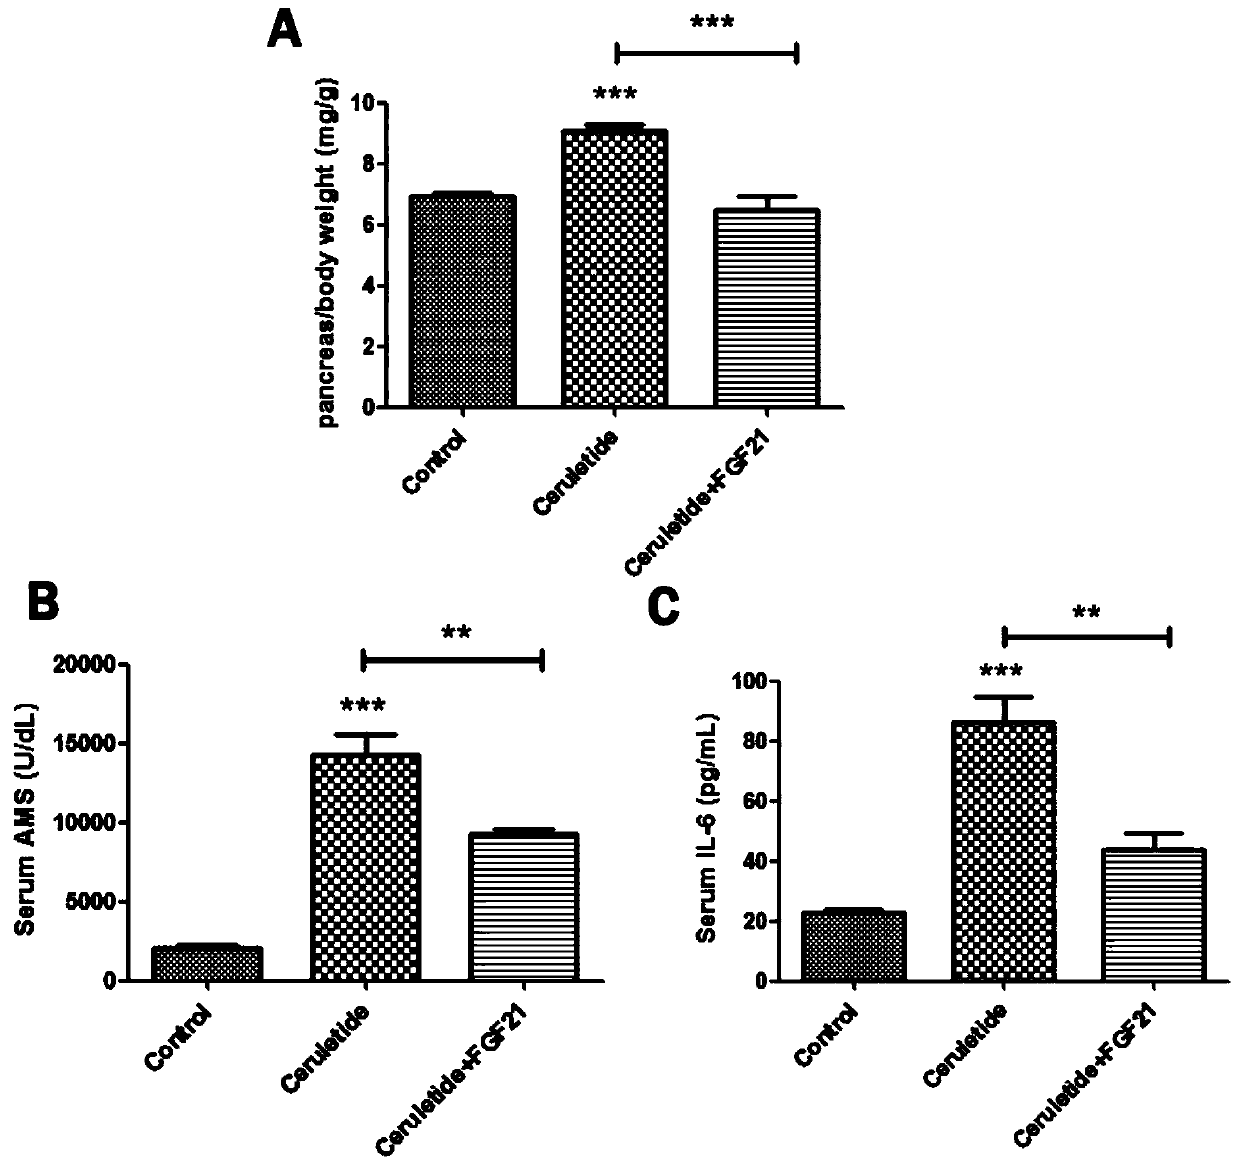 Application of fibroblast growth factor 21 (FGF 21) in preparation of drugs for treating acute pancreatitis